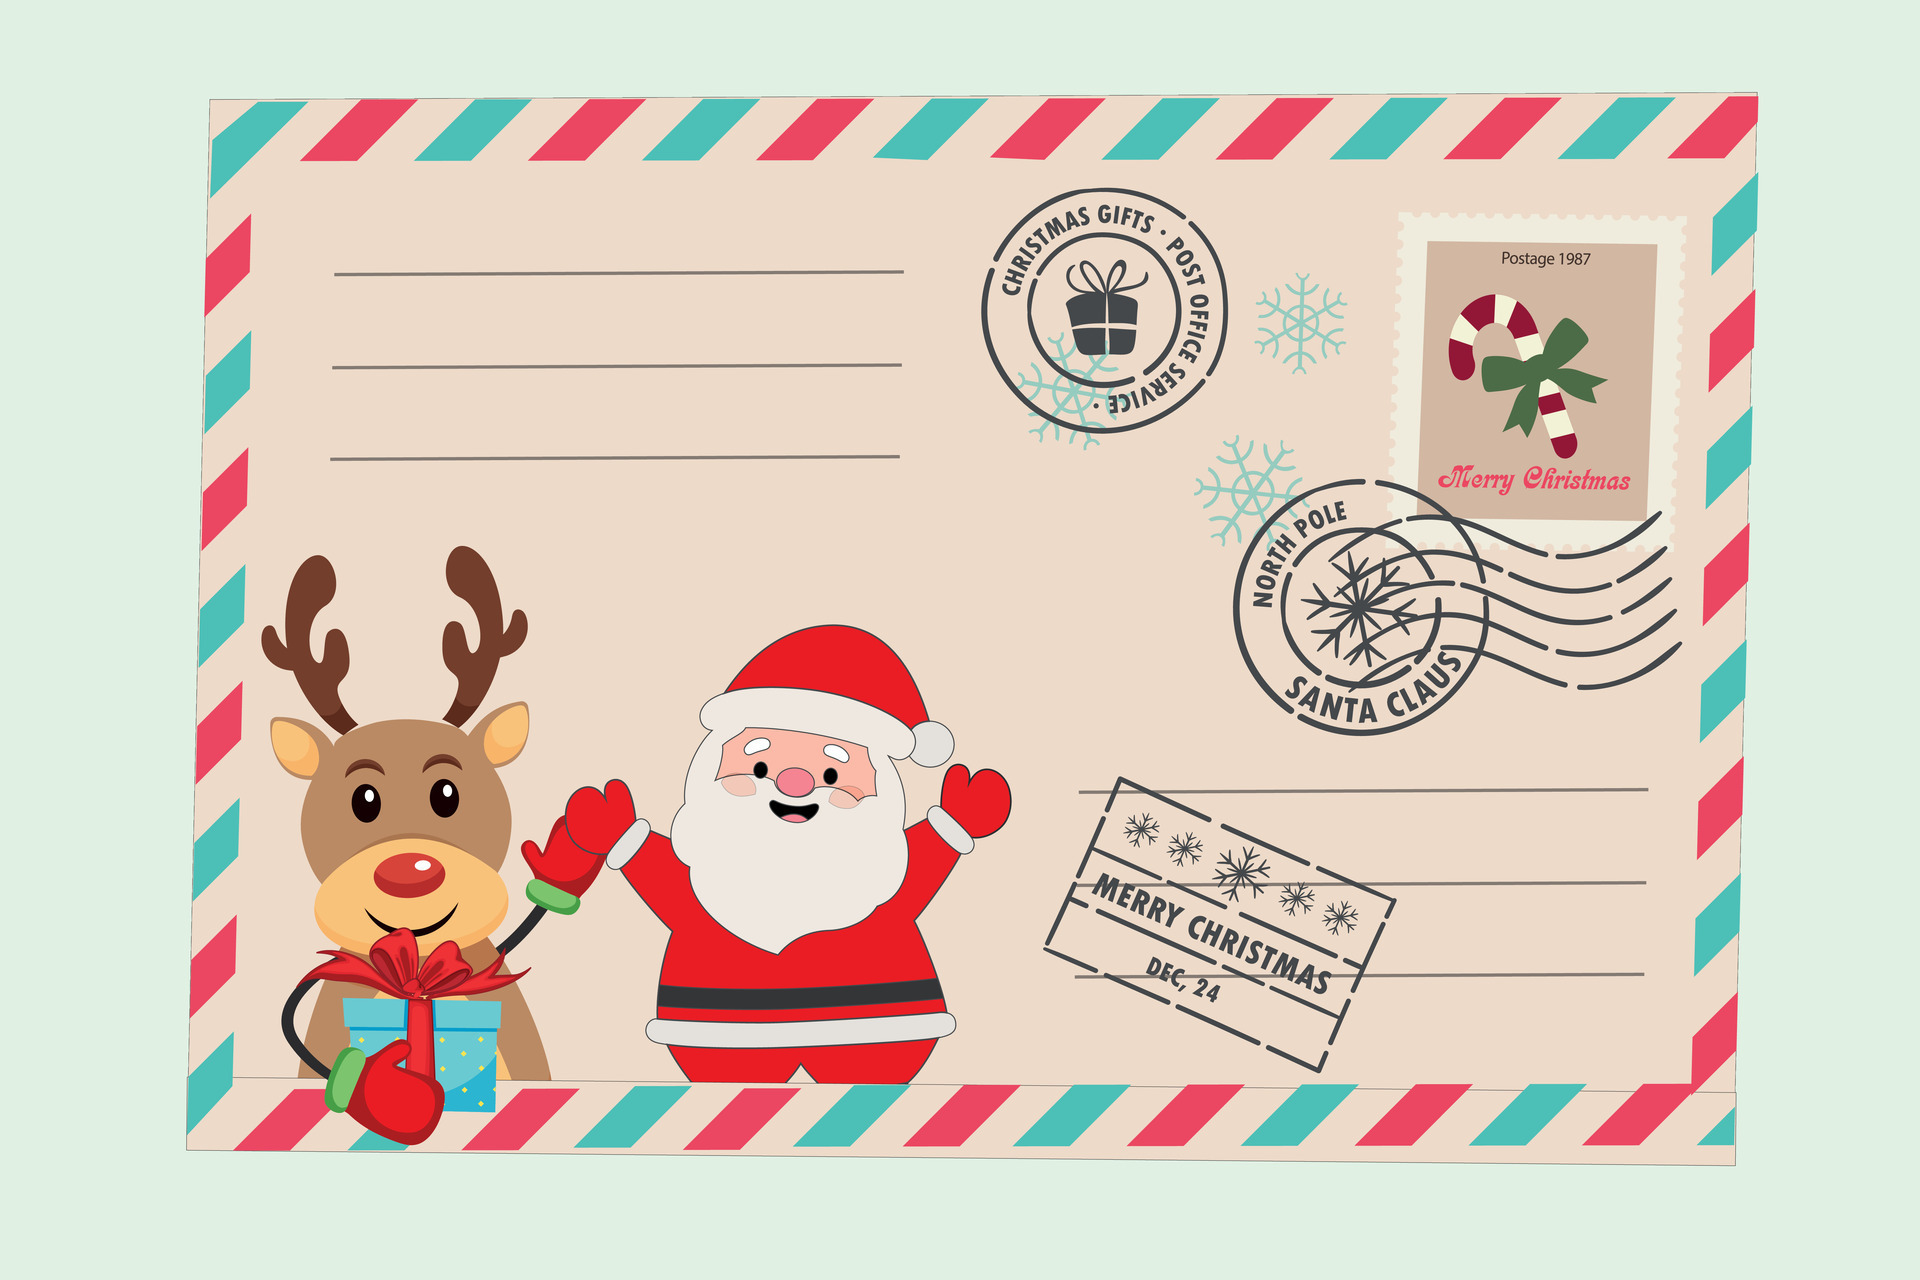 https://static.vecteezy.com/system/resources/previews/028/650/424/original/template-of-an-old-christmas-envelope-with-a-picture-of-santa-claus-and-holiday-deer-retro-style-christmas-card-with-rubber-seal-stamp-merry-christmas-card-winter-holiday-vintage-greeting-card-vector.jpg